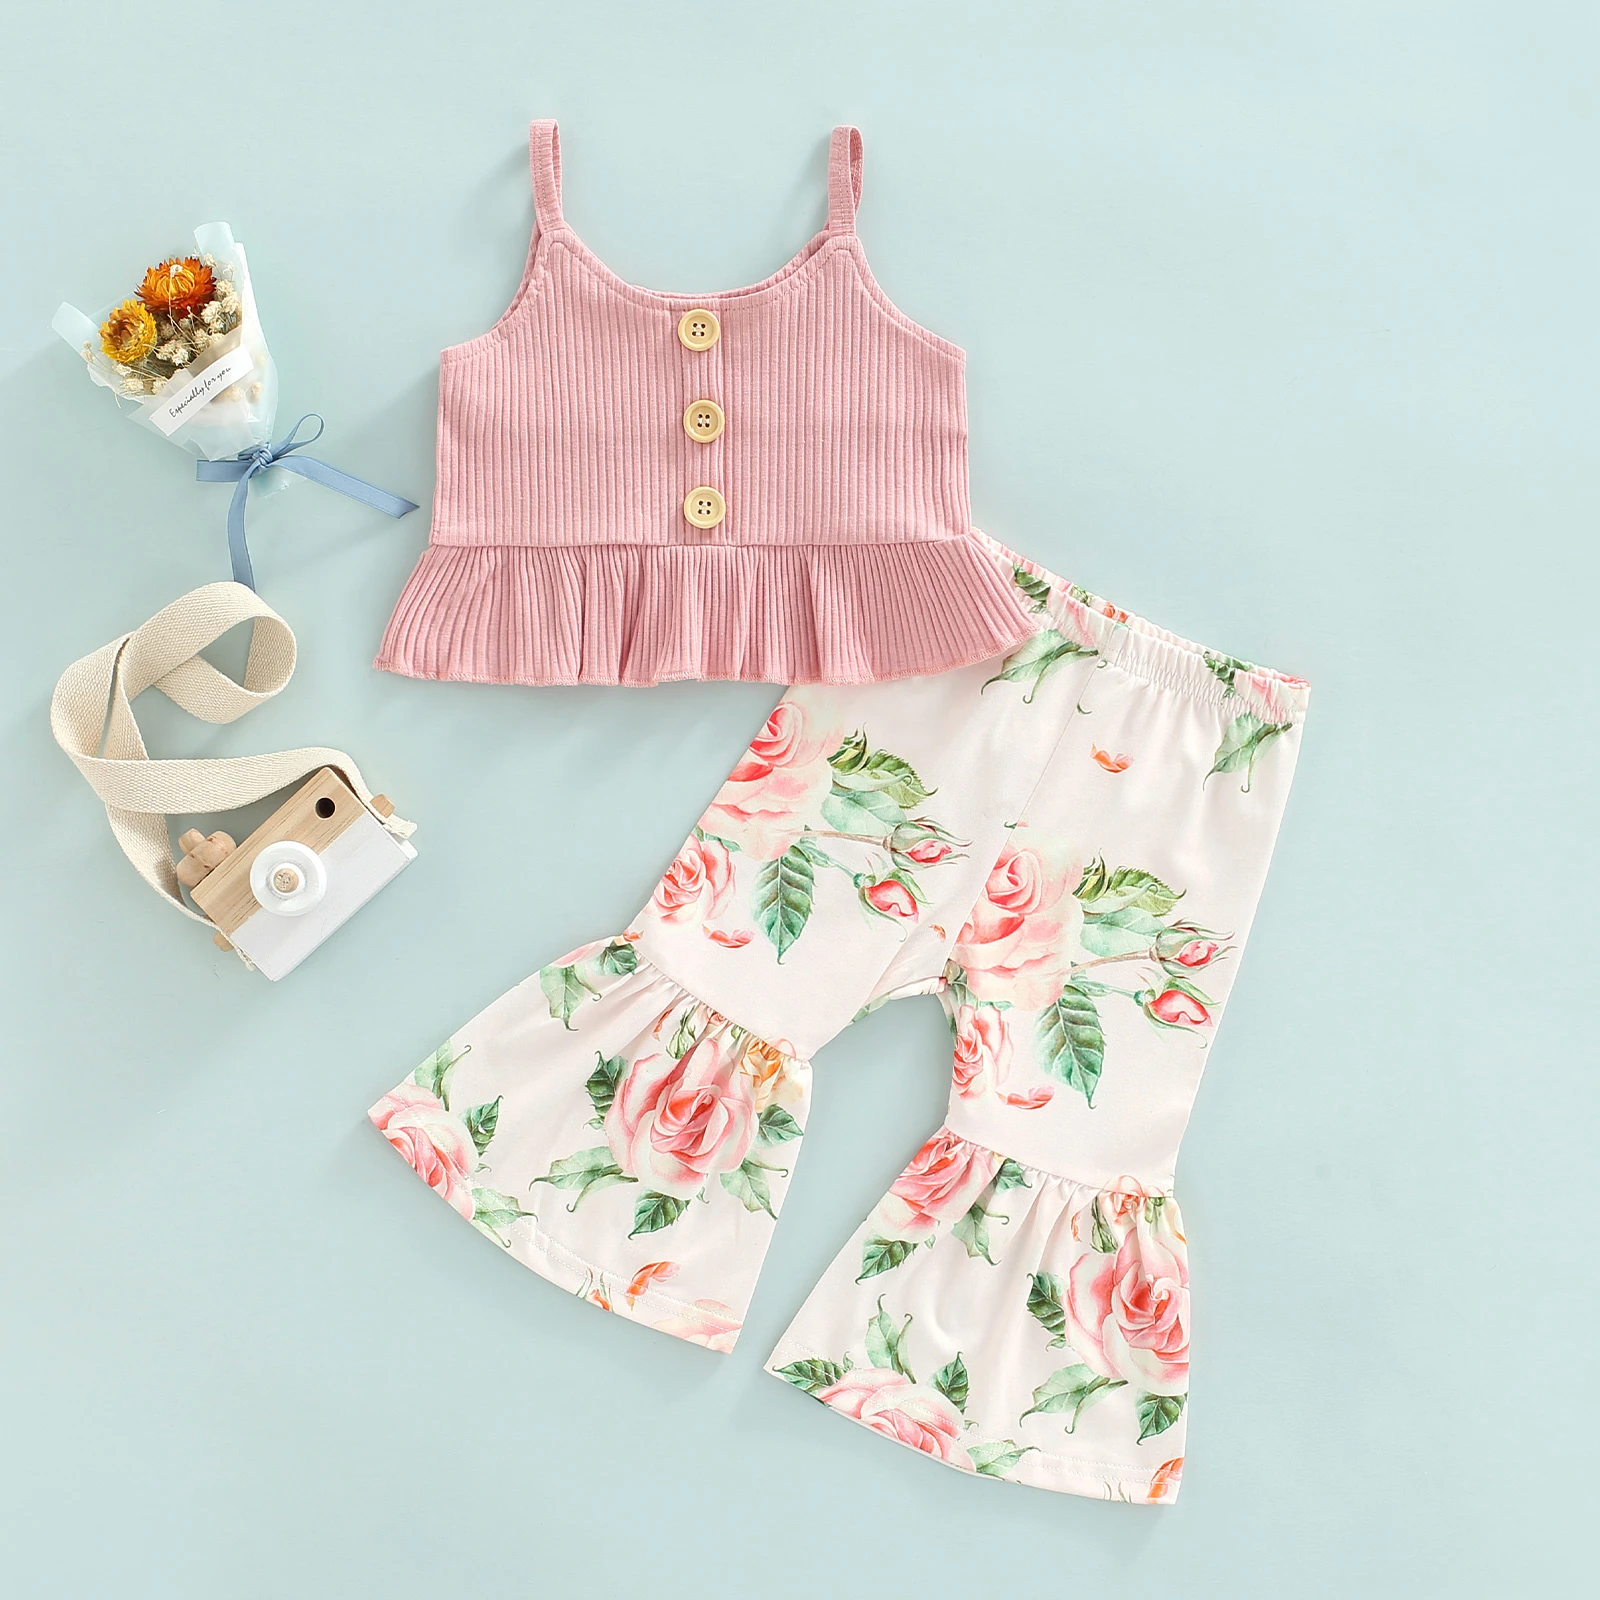 newborn baby clothing set Ma&Baby 6M-4Y Newborn Infant Baby Girls Clothes Set Summer Button Vest Tops Shorts Outfits Costumes D01 Baby Clothing Set discount